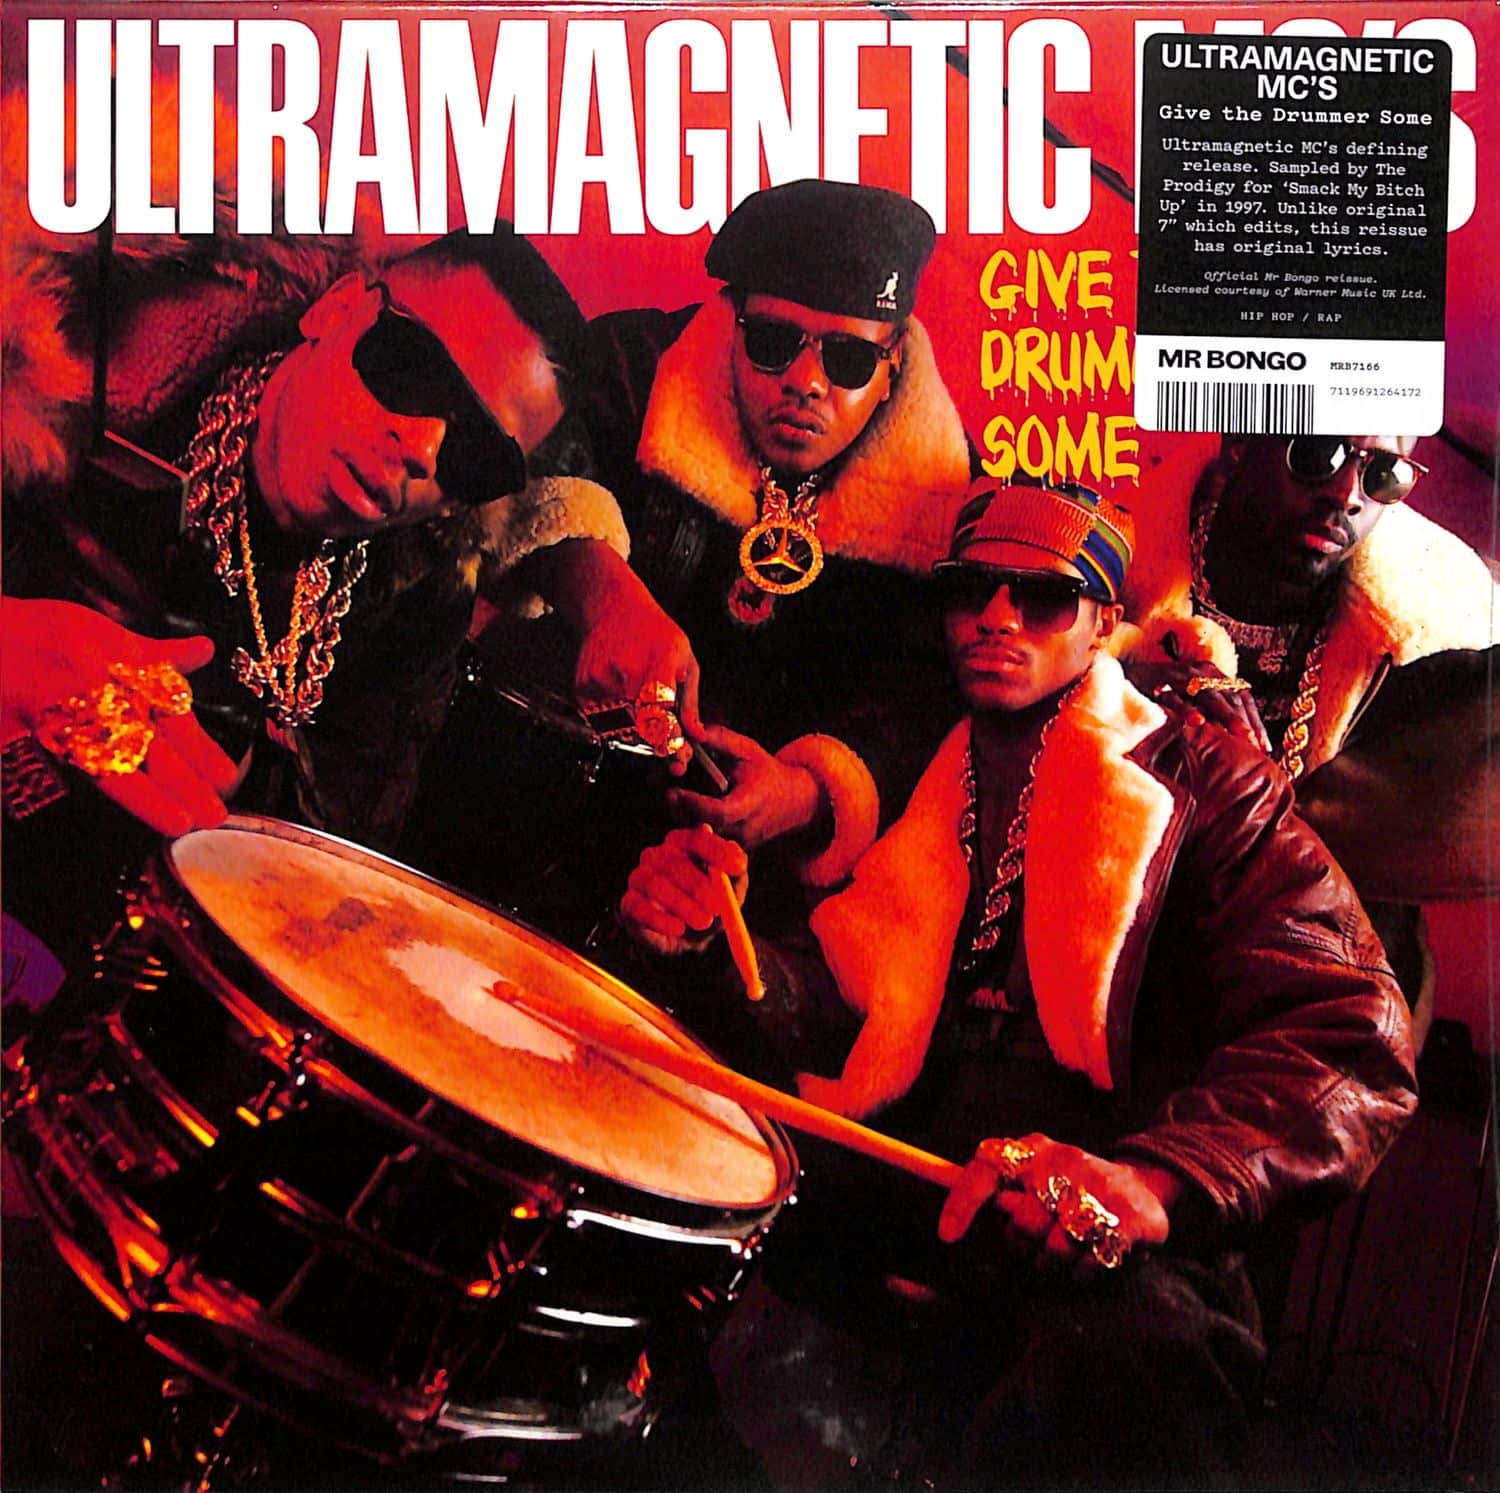 Ultramagnetic M.C.s - GIVE THE DRUMMER SOME 